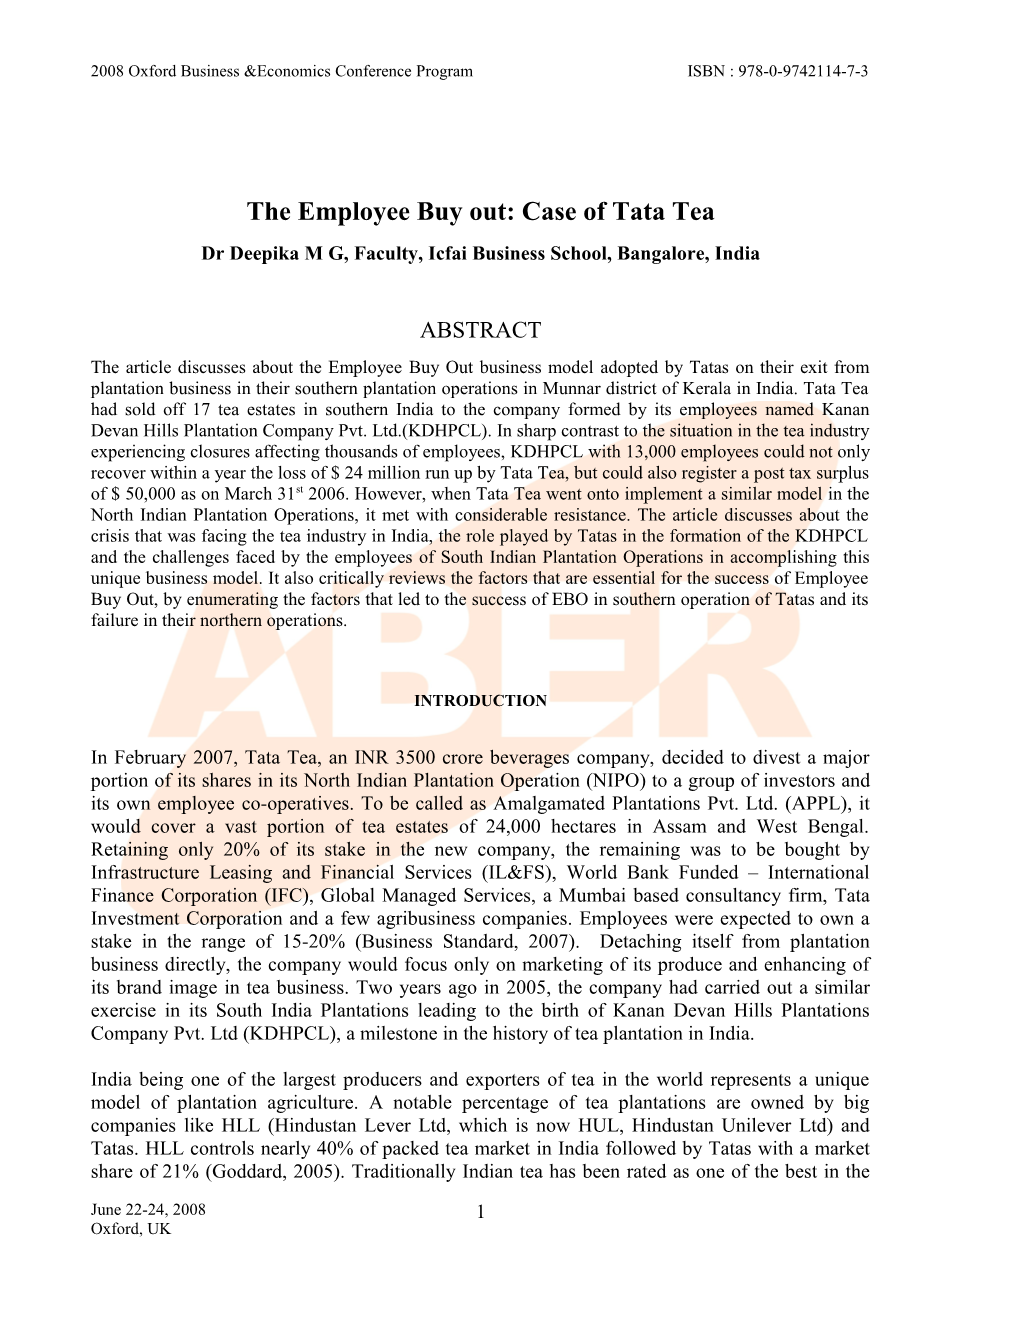 The Employee Buy Out-Case of Tata Tea